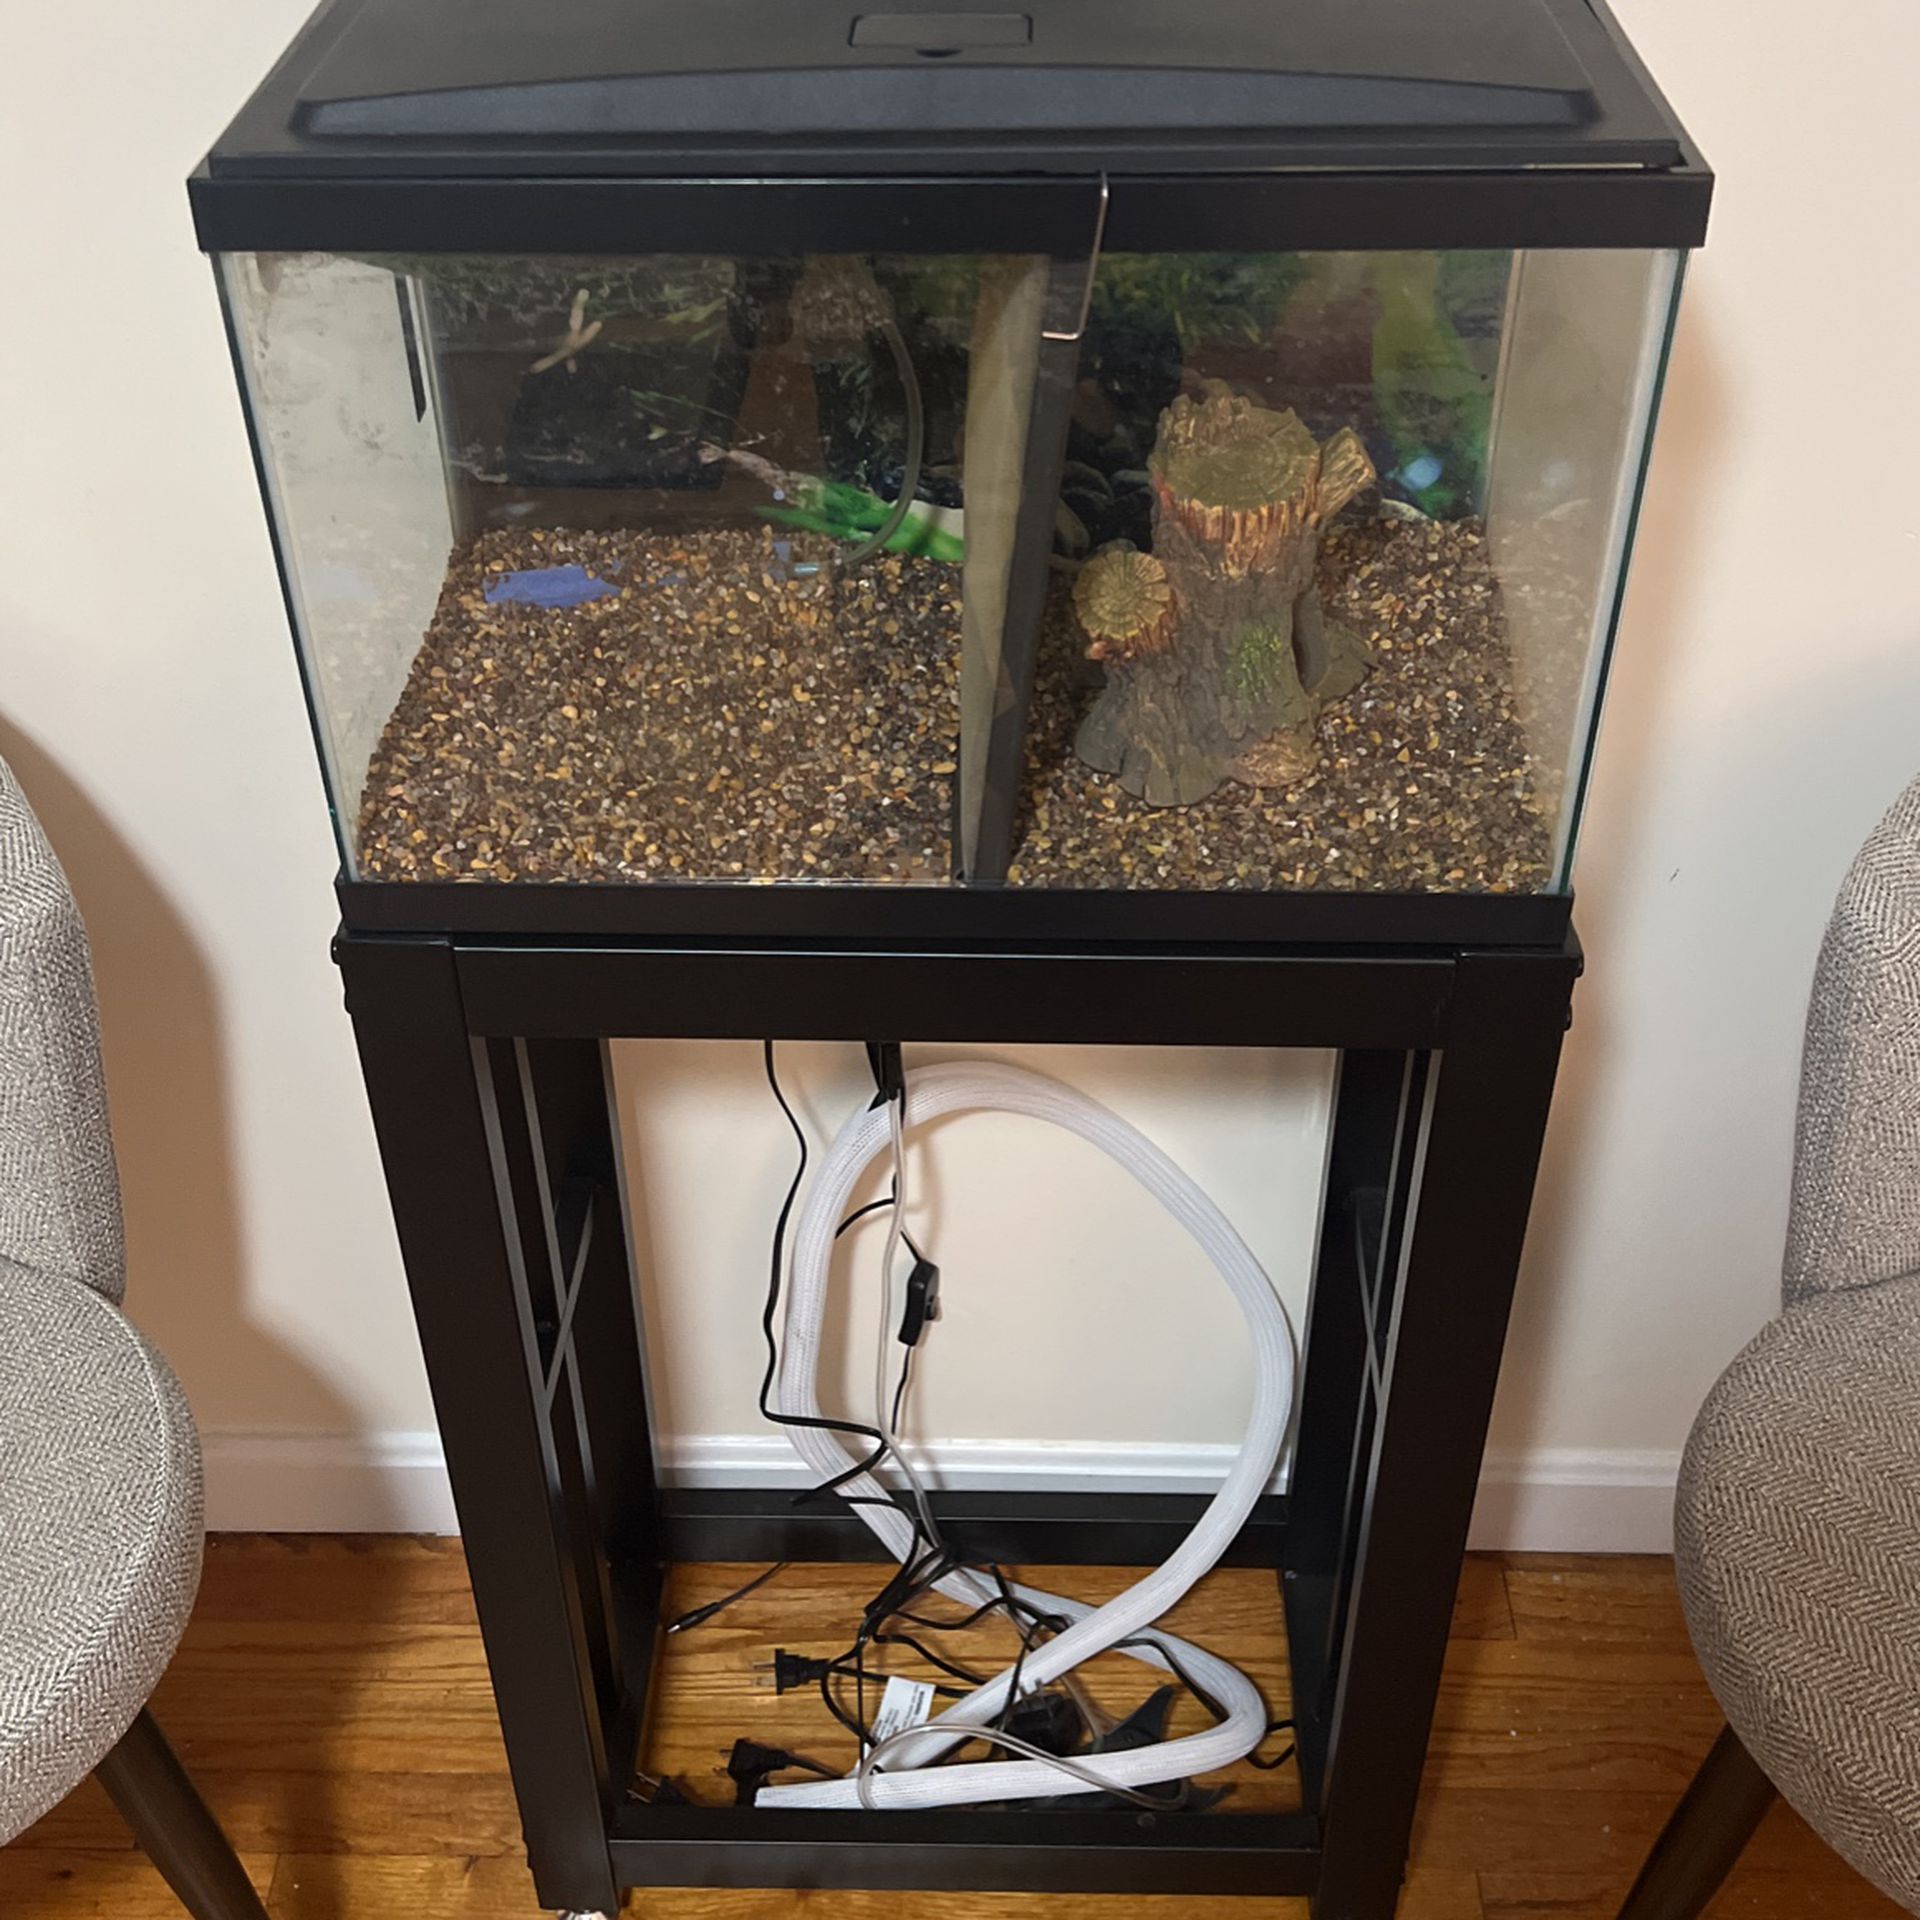  Nice 20 Gallon Fish Tank Set Up With Stand